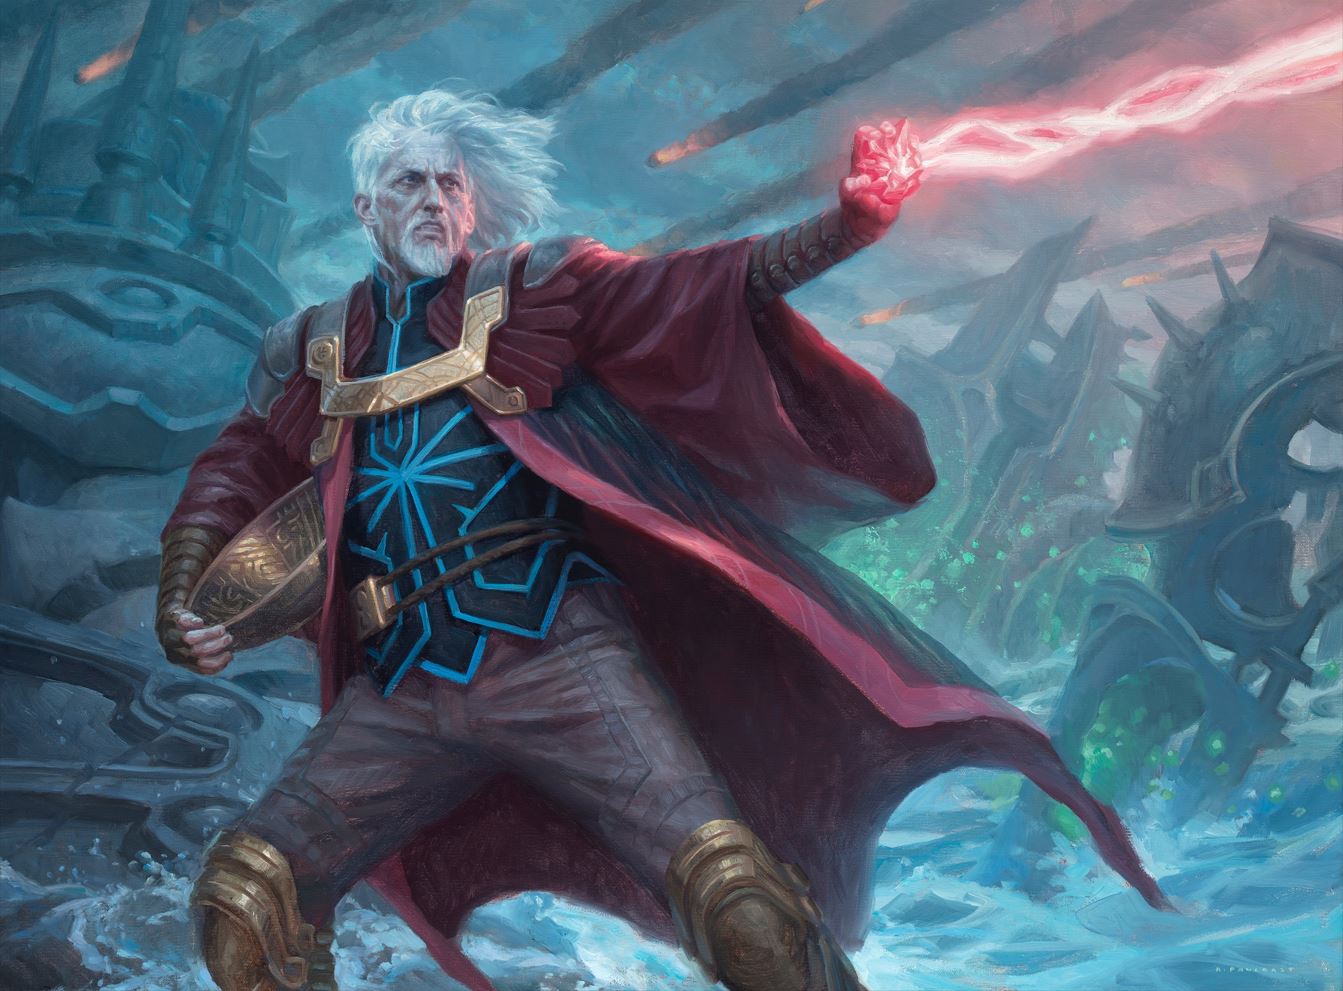 Urza, Lord Protector